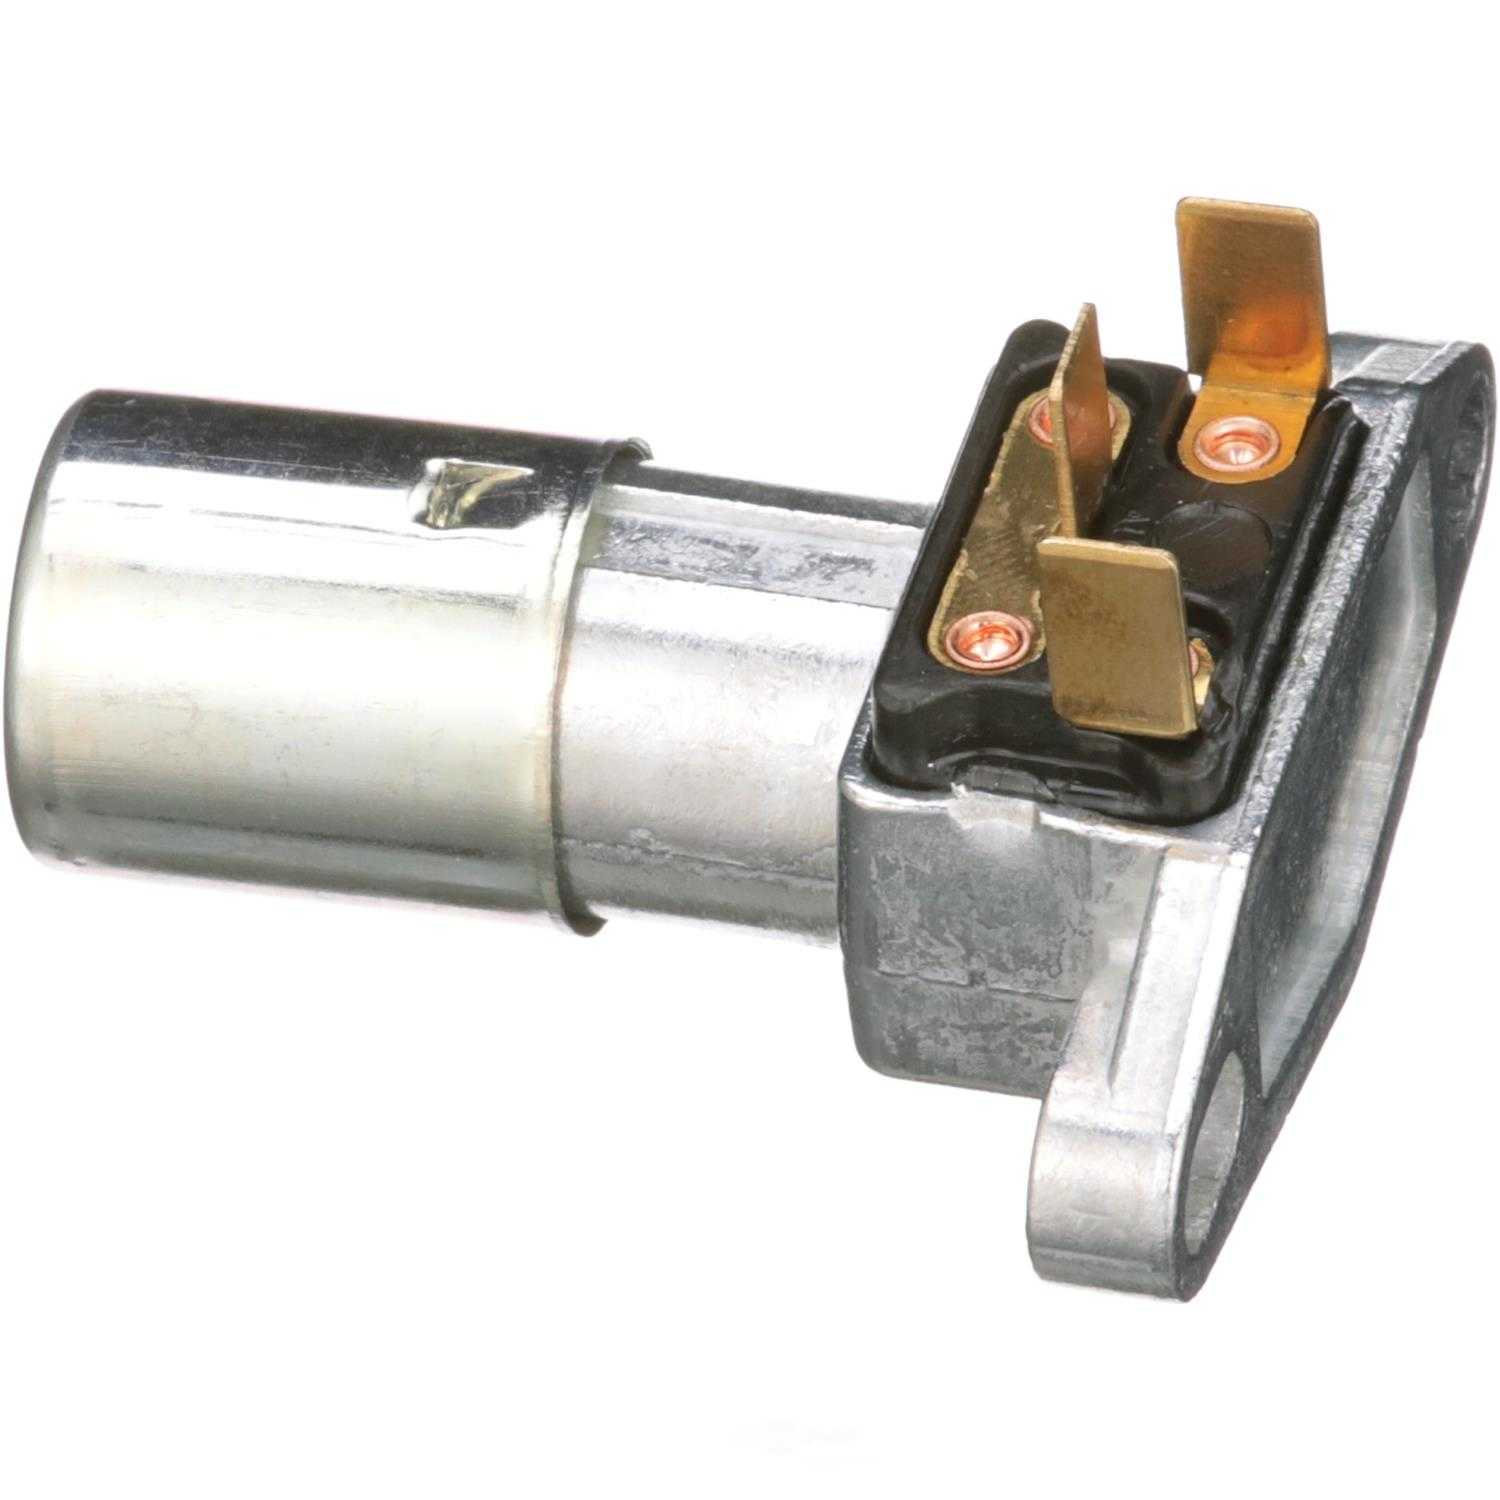 STANDARD MOTOR PRODUCTS - Headlight Dimmer Switch - STA DS-70